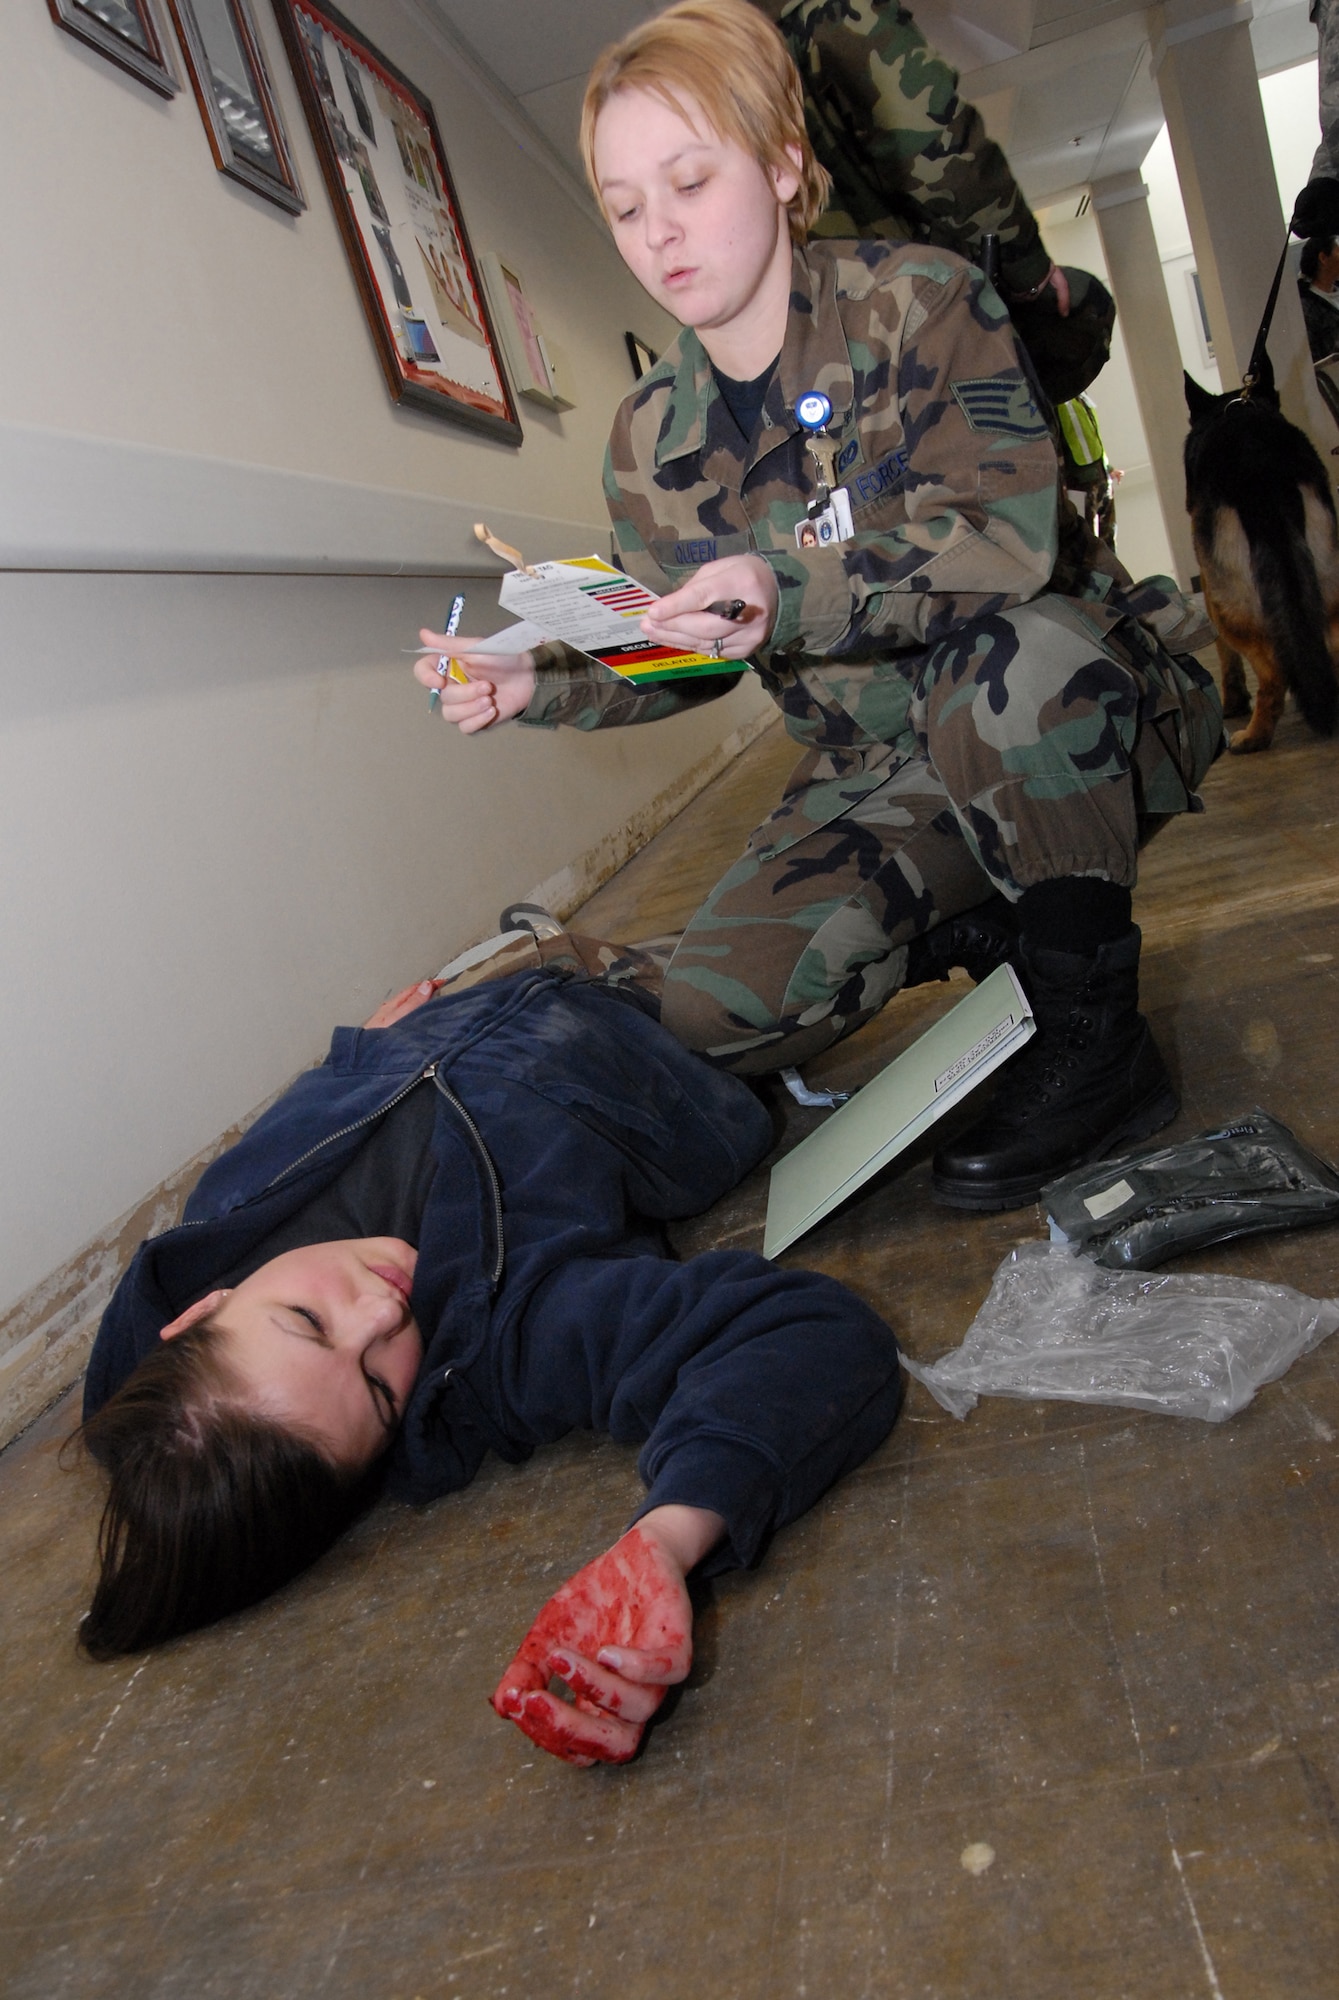 Staff Sgt. Mary Queen, 341st Medical Support Squadron, assesses a gunshot victim during a mass casualty exercise at the Malmstom Clinic in March. Moulaging victims for exercise scenarios enables medical personnel to better train for real-world possible situations when they deploy. (U.S. Air Force photo/John Turner)